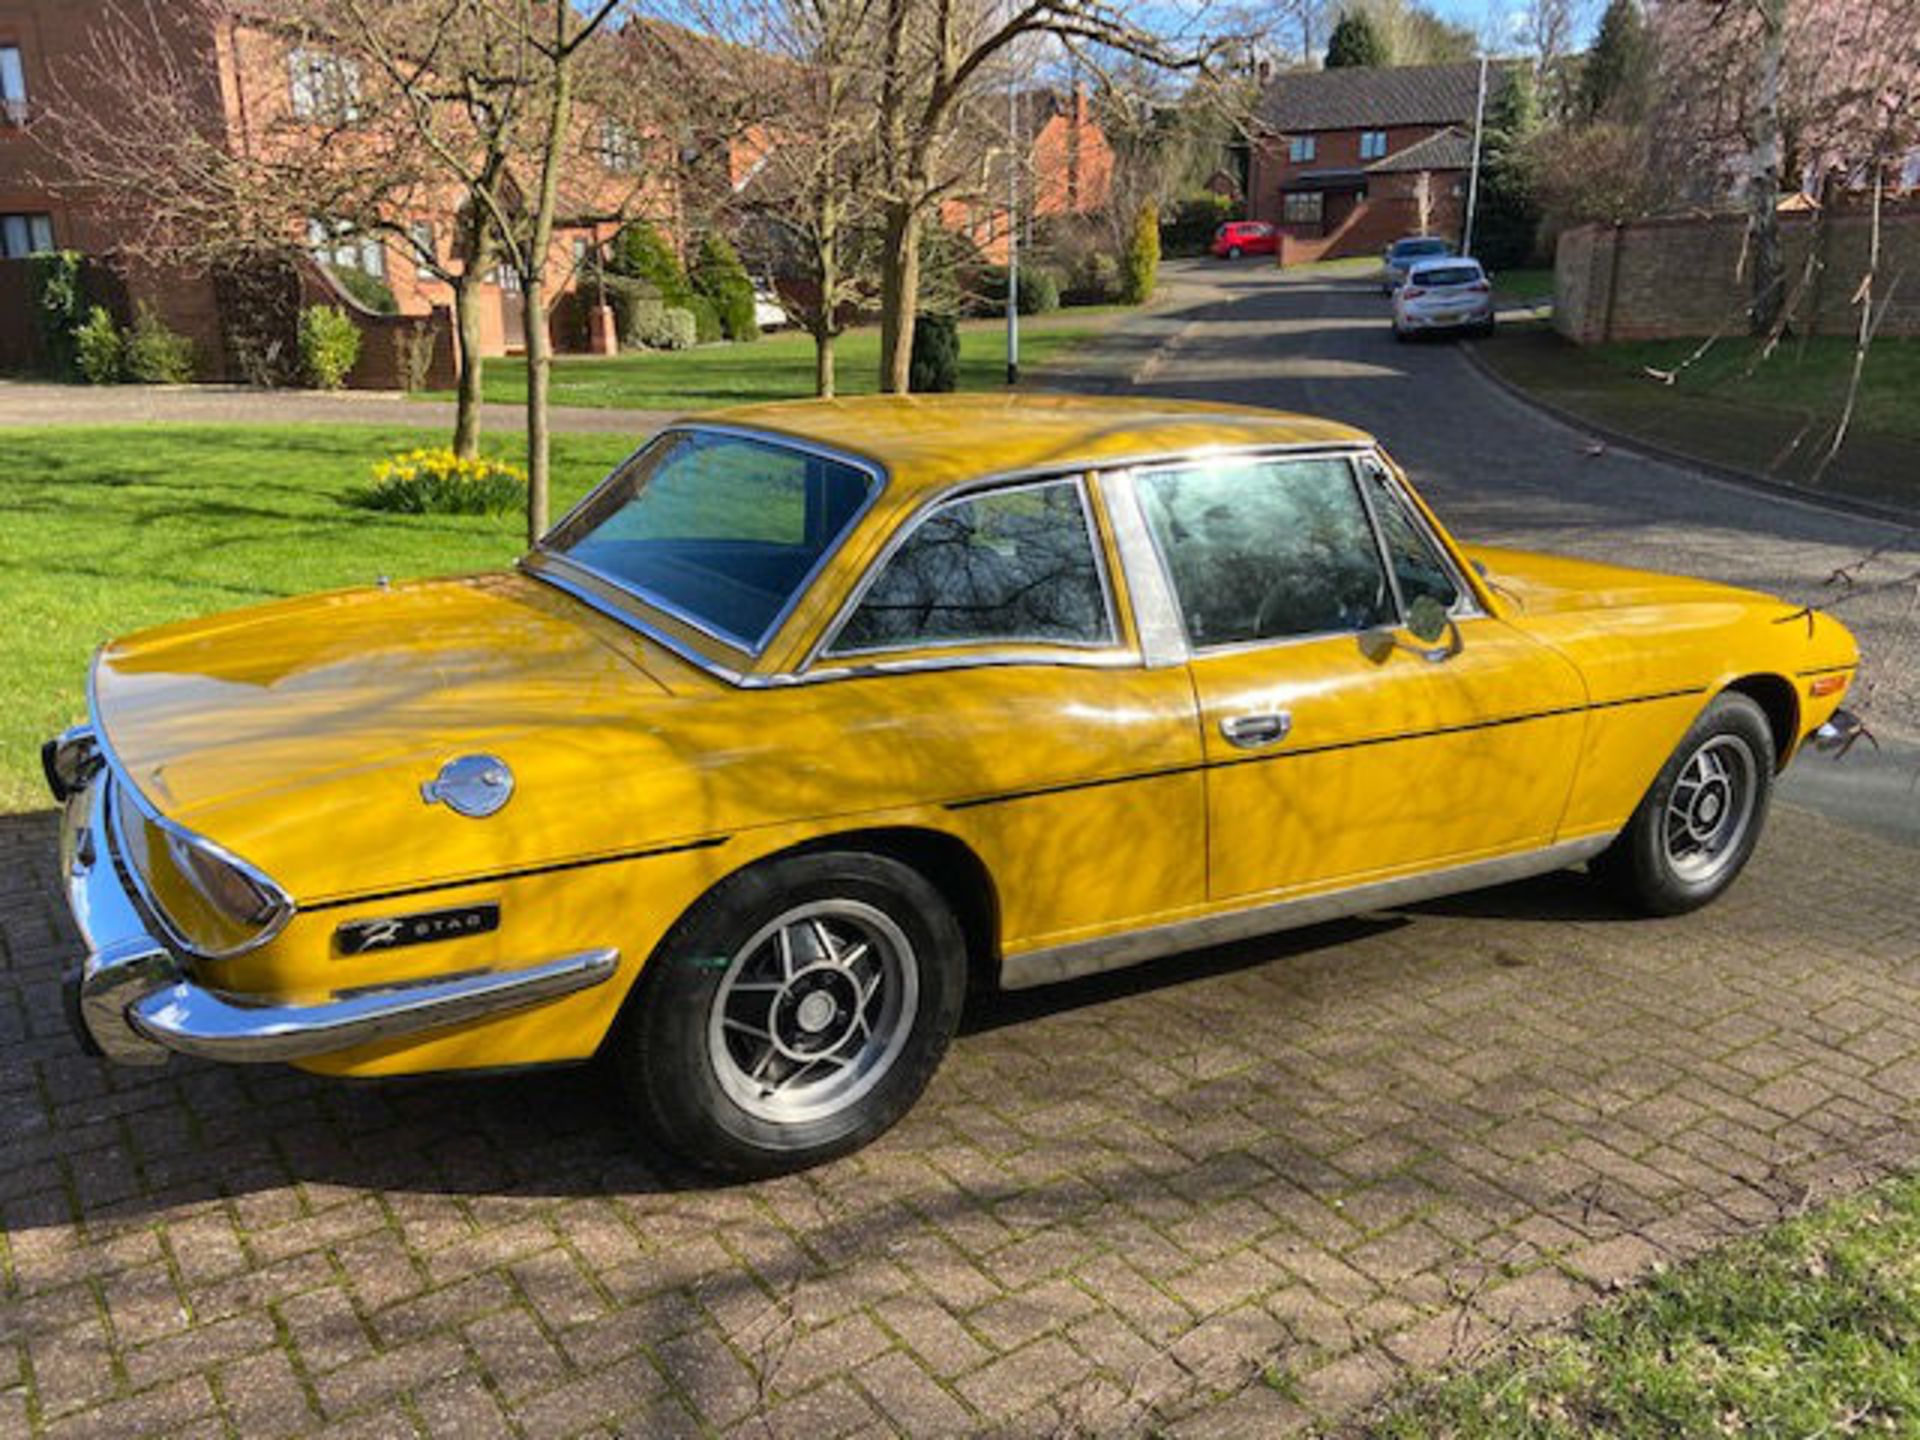 1976 Triumph Stag 3.0 Yellow - Image 2 of 6